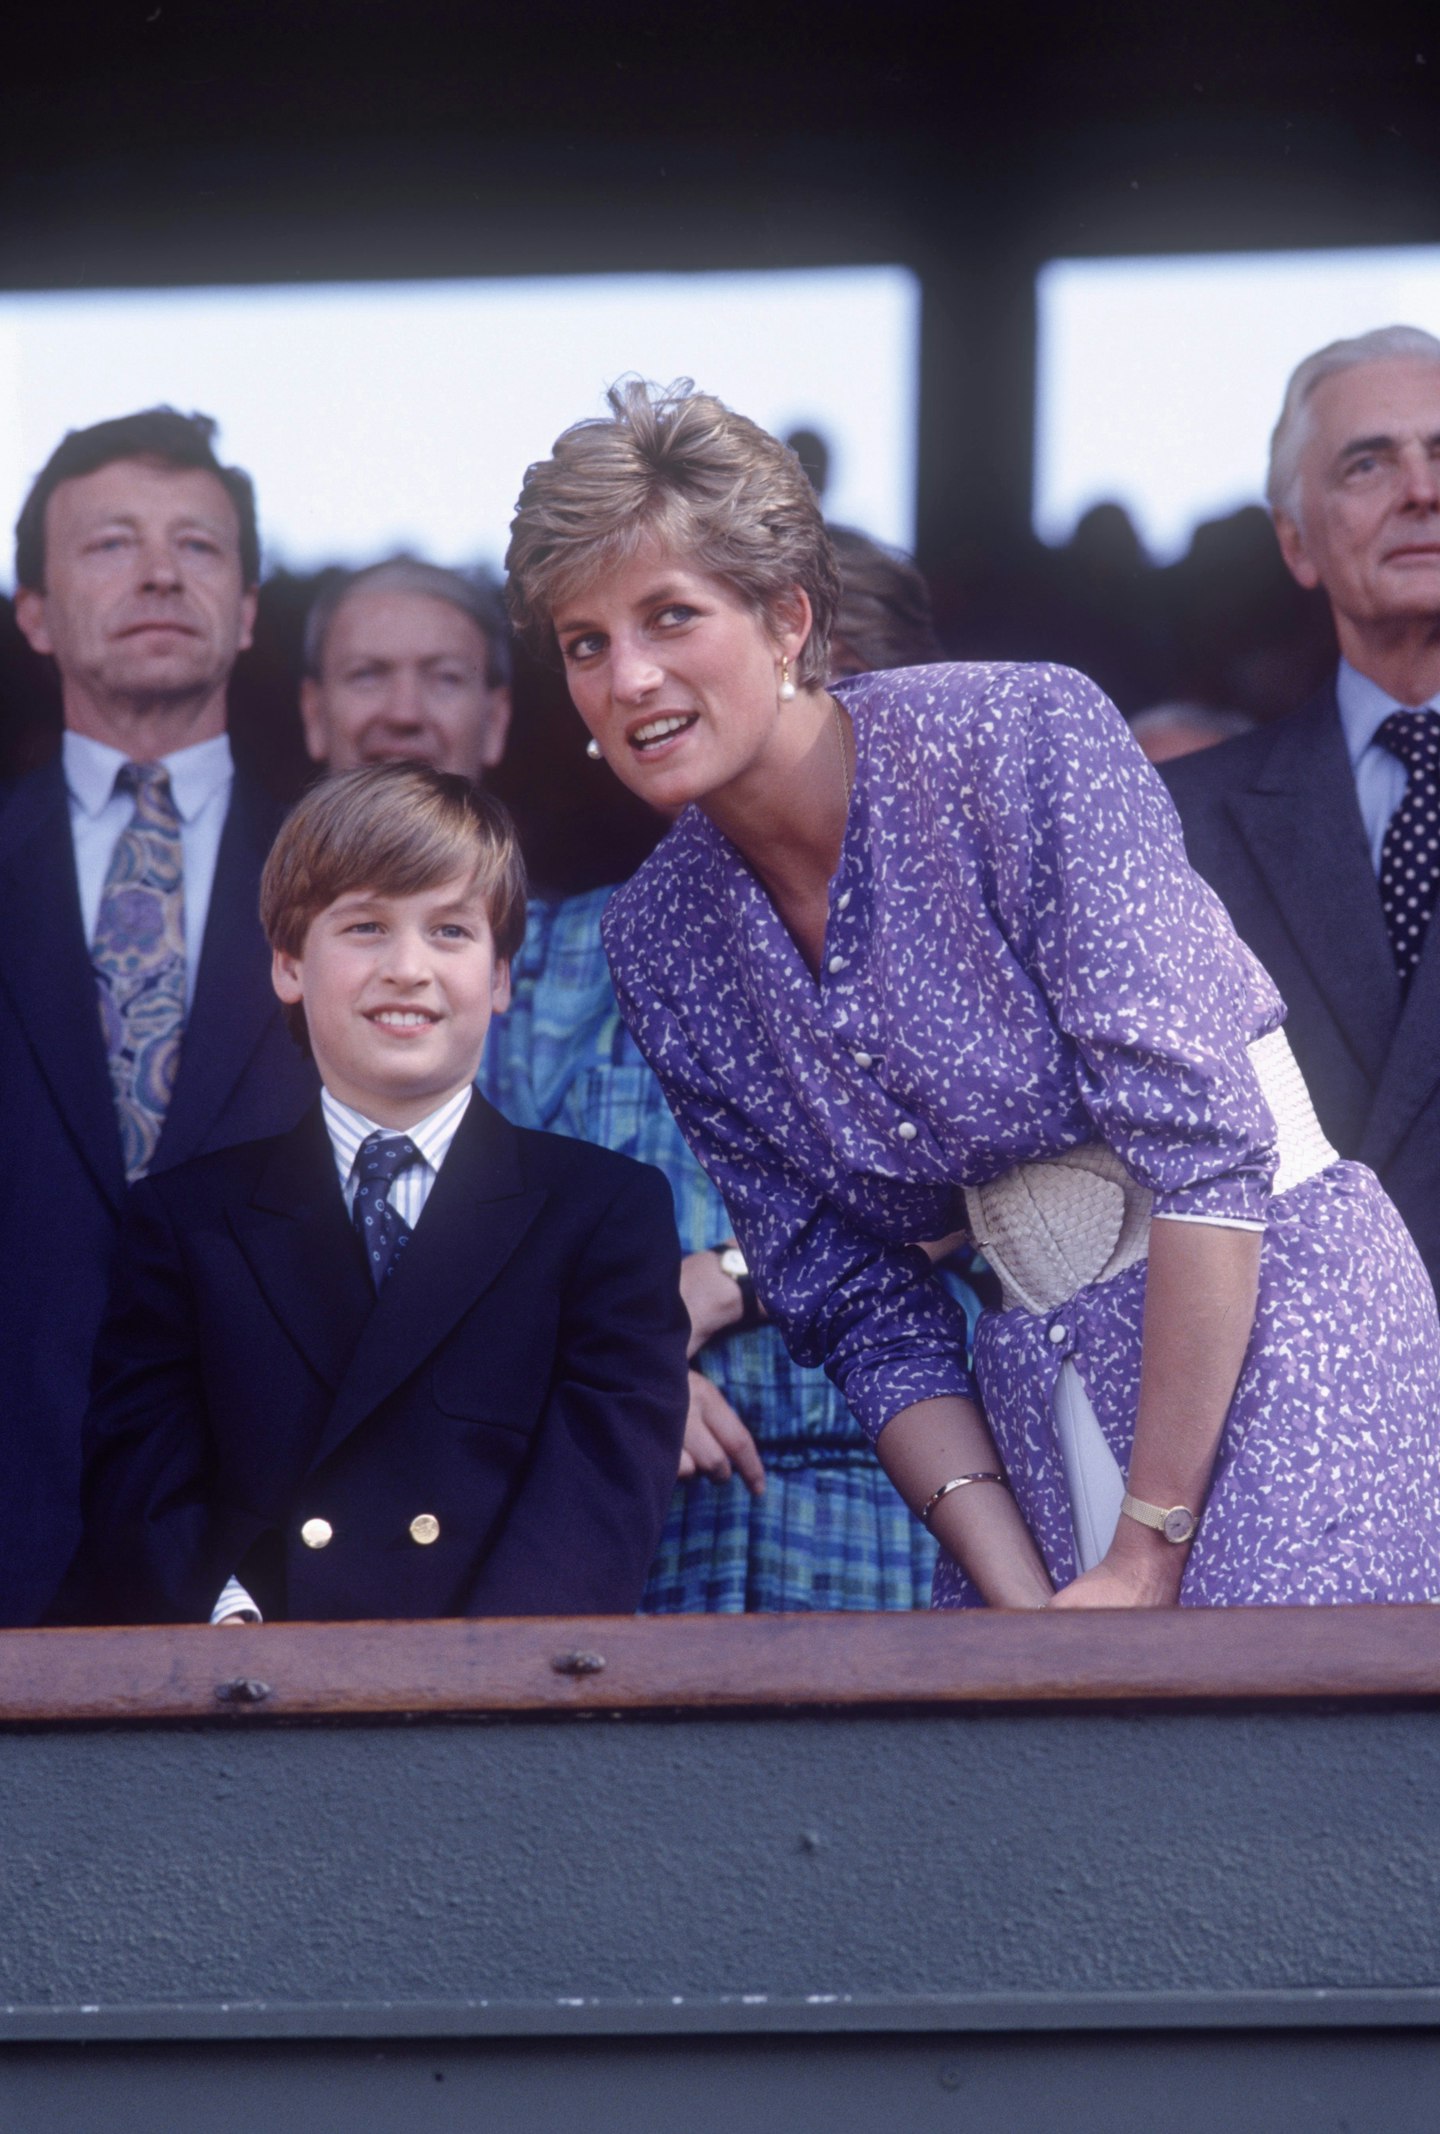 Princess Diana's famous clutch 'cleavage bags' revealed